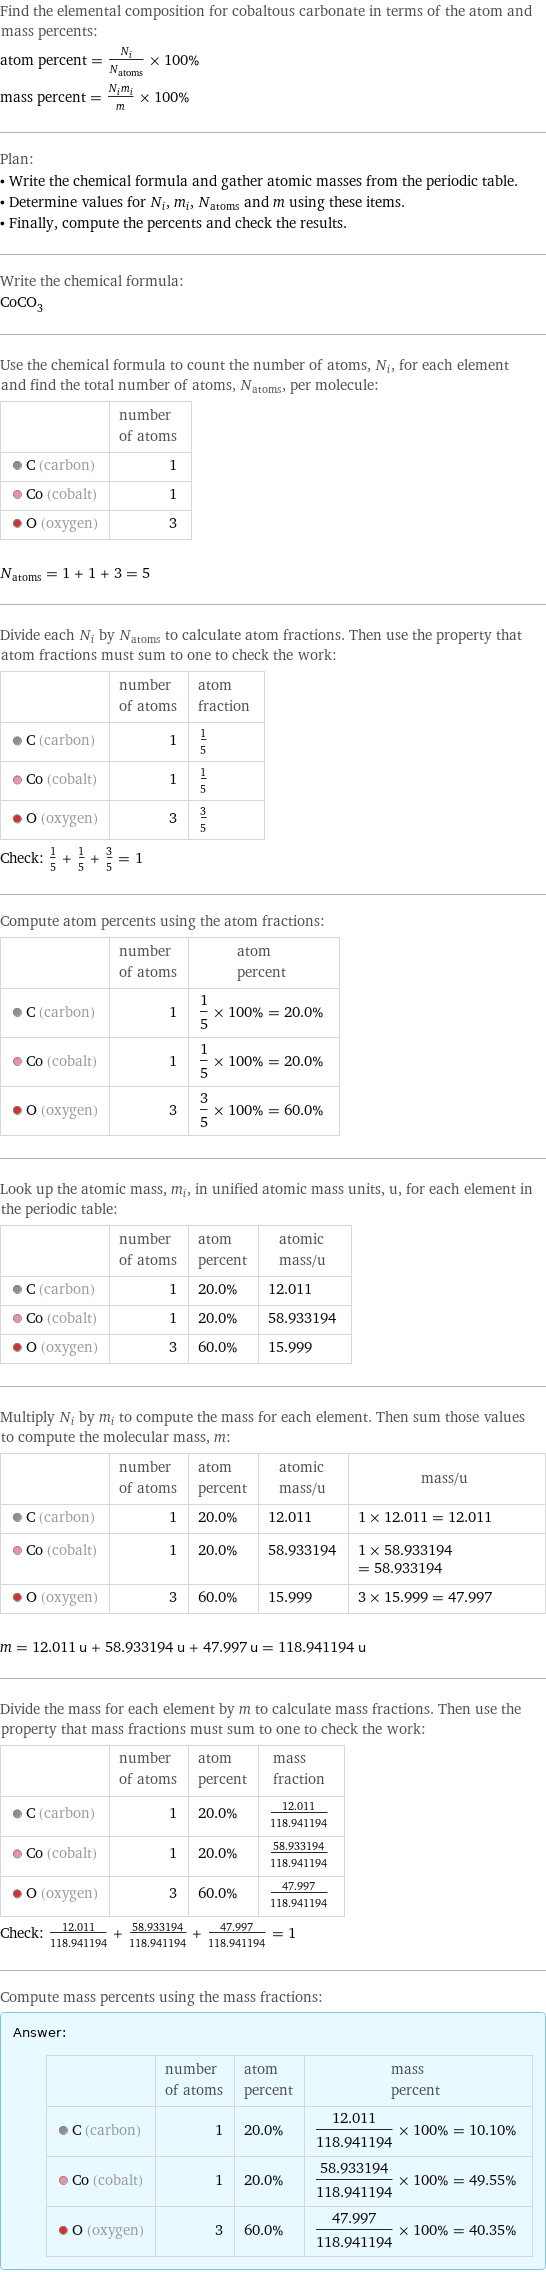 Find the elemental composition for cobaltous carbonate in terms of the atom and mass percents: atom percent = N_i/N_atoms × 100% mass percent = (N_im_i)/m × 100% Plan: • Write the chemical formula and gather atomic masses from the periodic table. • Determine values for N_i, m_i, N_atoms and m using these items. • Finally, compute the percents and check the results. Write the chemical formula: CoCO_3 Use the chemical formula to count the number of atoms, N_i, for each element and find the total number of atoms, N_atoms, per molecule:  | number of atoms  C (carbon) | 1  Co (cobalt) | 1  O (oxygen) | 3  N_atoms = 1 + 1 + 3 = 5 Divide each N_i by N_atoms to calculate atom fractions. Then use the property that atom fractions must sum to one to check the work:  | number of atoms | atom fraction  C (carbon) | 1 | 1/5  Co (cobalt) | 1 | 1/5  O (oxygen) | 3 | 3/5 Check: 1/5 + 1/5 + 3/5 = 1 Compute atom percents using the atom fractions:  | number of atoms | atom percent  C (carbon) | 1 | 1/5 × 100% = 20.0%  Co (cobalt) | 1 | 1/5 × 100% = 20.0%  O (oxygen) | 3 | 3/5 × 100% = 60.0% Look up the atomic mass, m_i, in unified atomic mass units, u, for each element in the periodic table:  | number of atoms | atom percent | atomic mass/u  C (carbon) | 1 | 20.0% | 12.011  Co (cobalt) | 1 | 20.0% | 58.933194  O (oxygen) | 3 | 60.0% | 15.999 Multiply N_i by m_i to compute the mass for each element. Then sum those values to compute the molecular mass, m:  | number of atoms | atom percent | atomic mass/u | mass/u  C (carbon) | 1 | 20.0% | 12.011 | 1 × 12.011 = 12.011  Co (cobalt) | 1 | 20.0% | 58.933194 | 1 × 58.933194 = 58.933194  O (oxygen) | 3 | 60.0% | 15.999 | 3 × 15.999 = 47.997  m = 12.011 u + 58.933194 u + 47.997 u = 118.941194 u Divide the mass for each element by m to calculate mass fractions. Then use the property that mass fractions must sum to one to check the work:  | number of atoms | atom percent | mass fraction  C (carbon) | 1 | 20.0% | 12.011/118.941194  Co (cobalt) | 1 | 20.0% | 58.933194/118.941194  O (oxygen) | 3 | 60.0% | 47.997/118.941194 Check: 12.011/118.941194 + 58.933194/118.941194 + 47.997/118.941194 = 1 Compute mass percents using the mass fractions: Answer: |   | | number of atoms | atom percent | mass percent  C (carbon) | 1 | 20.0% | 12.011/118.941194 × 100% = 10.10%  Co (cobalt) | 1 | 20.0% | 58.933194/118.941194 × 100% = 49.55%  O (oxygen) | 3 | 60.0% | 47.997/118.941194 × 100% = 40.35%